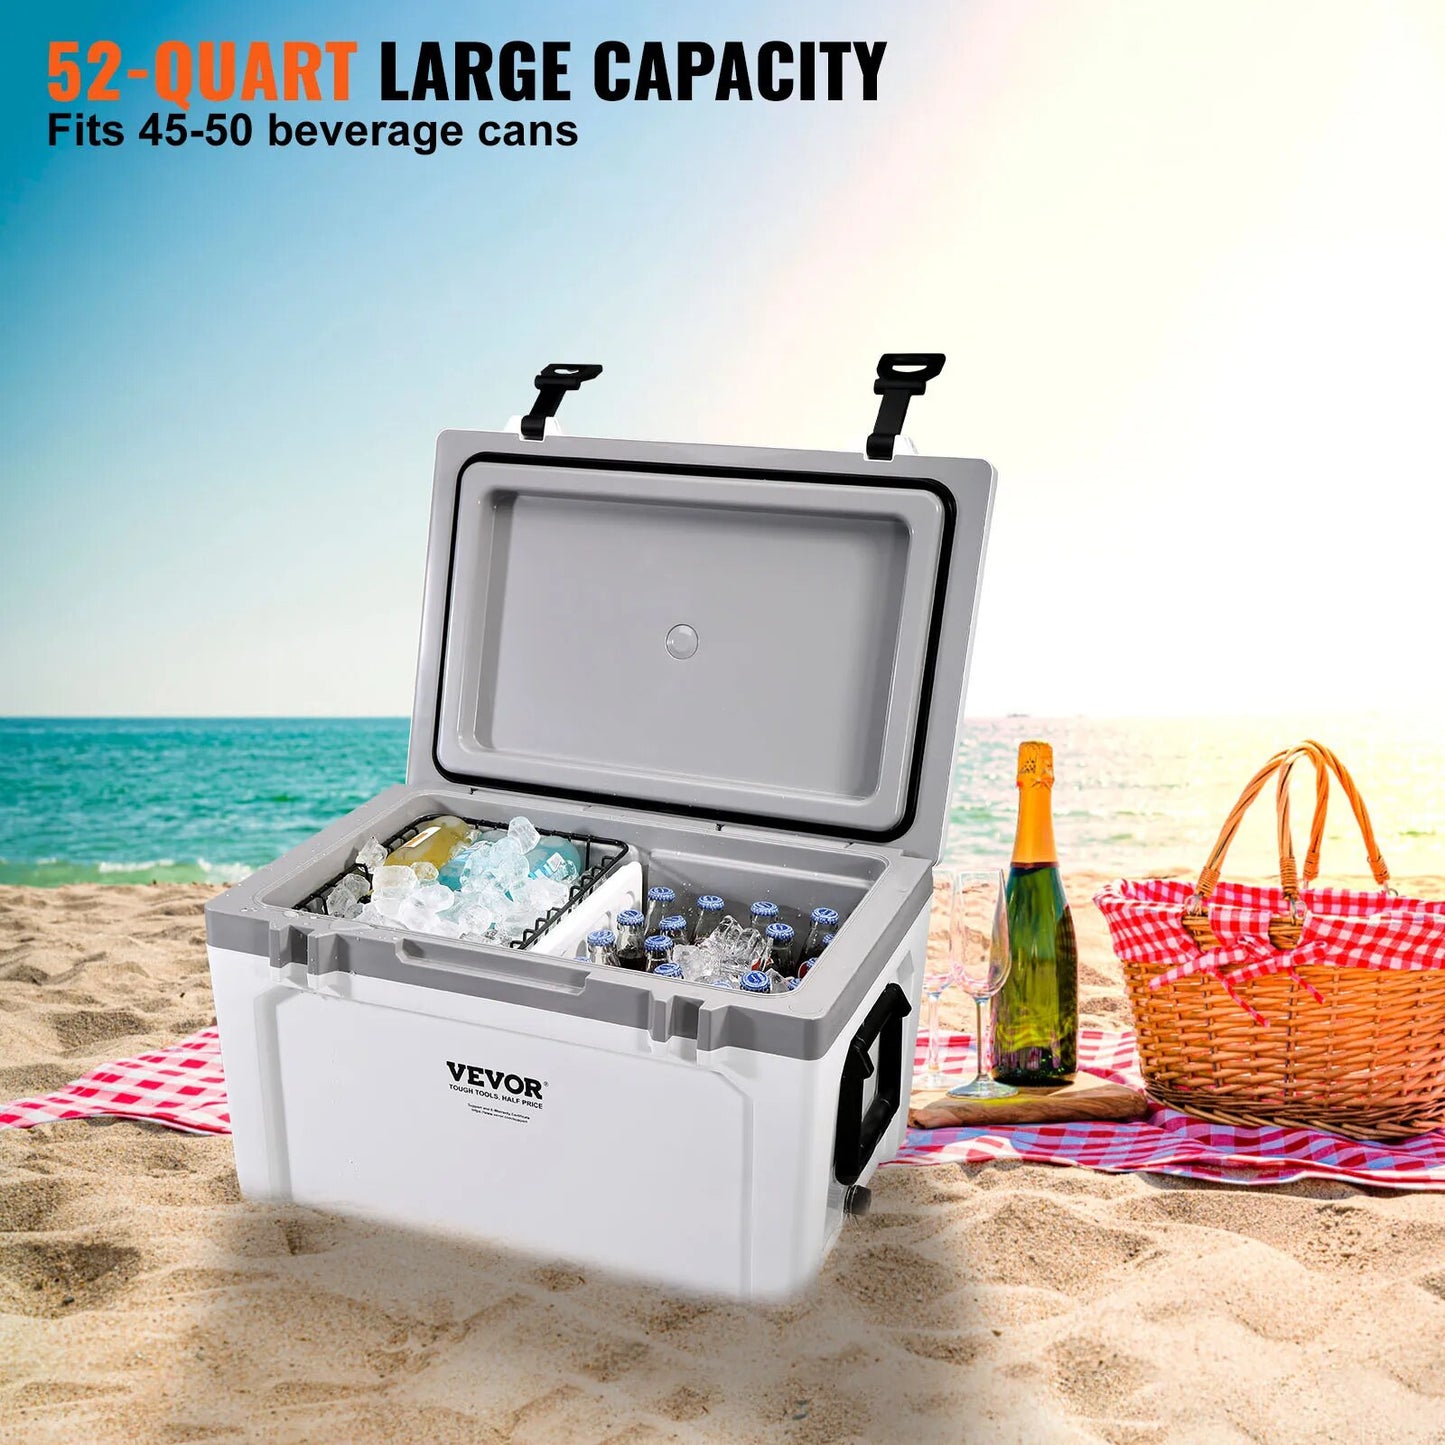 VEVOR 25/33/45/52QT Portable Hard Cooler Fully Insulated Ice Chest